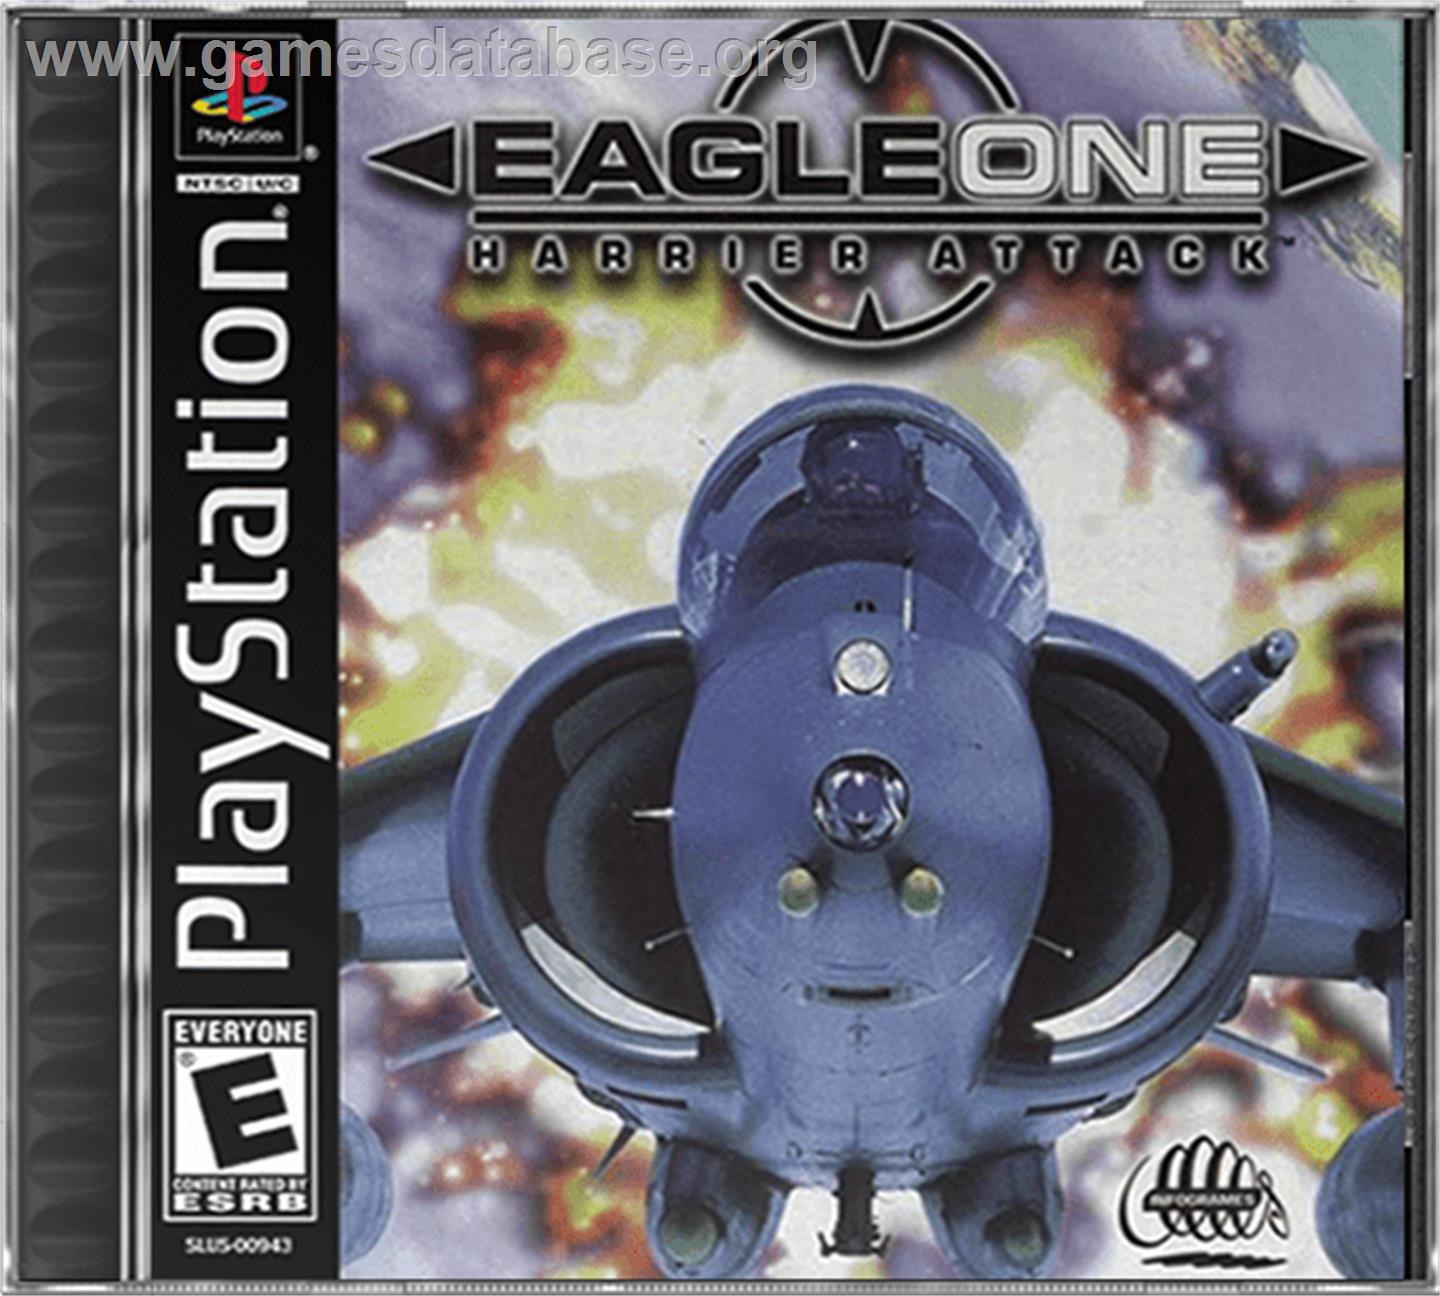 Eagle One: Harrier Attack - Sony Playstation - Artwork - Box